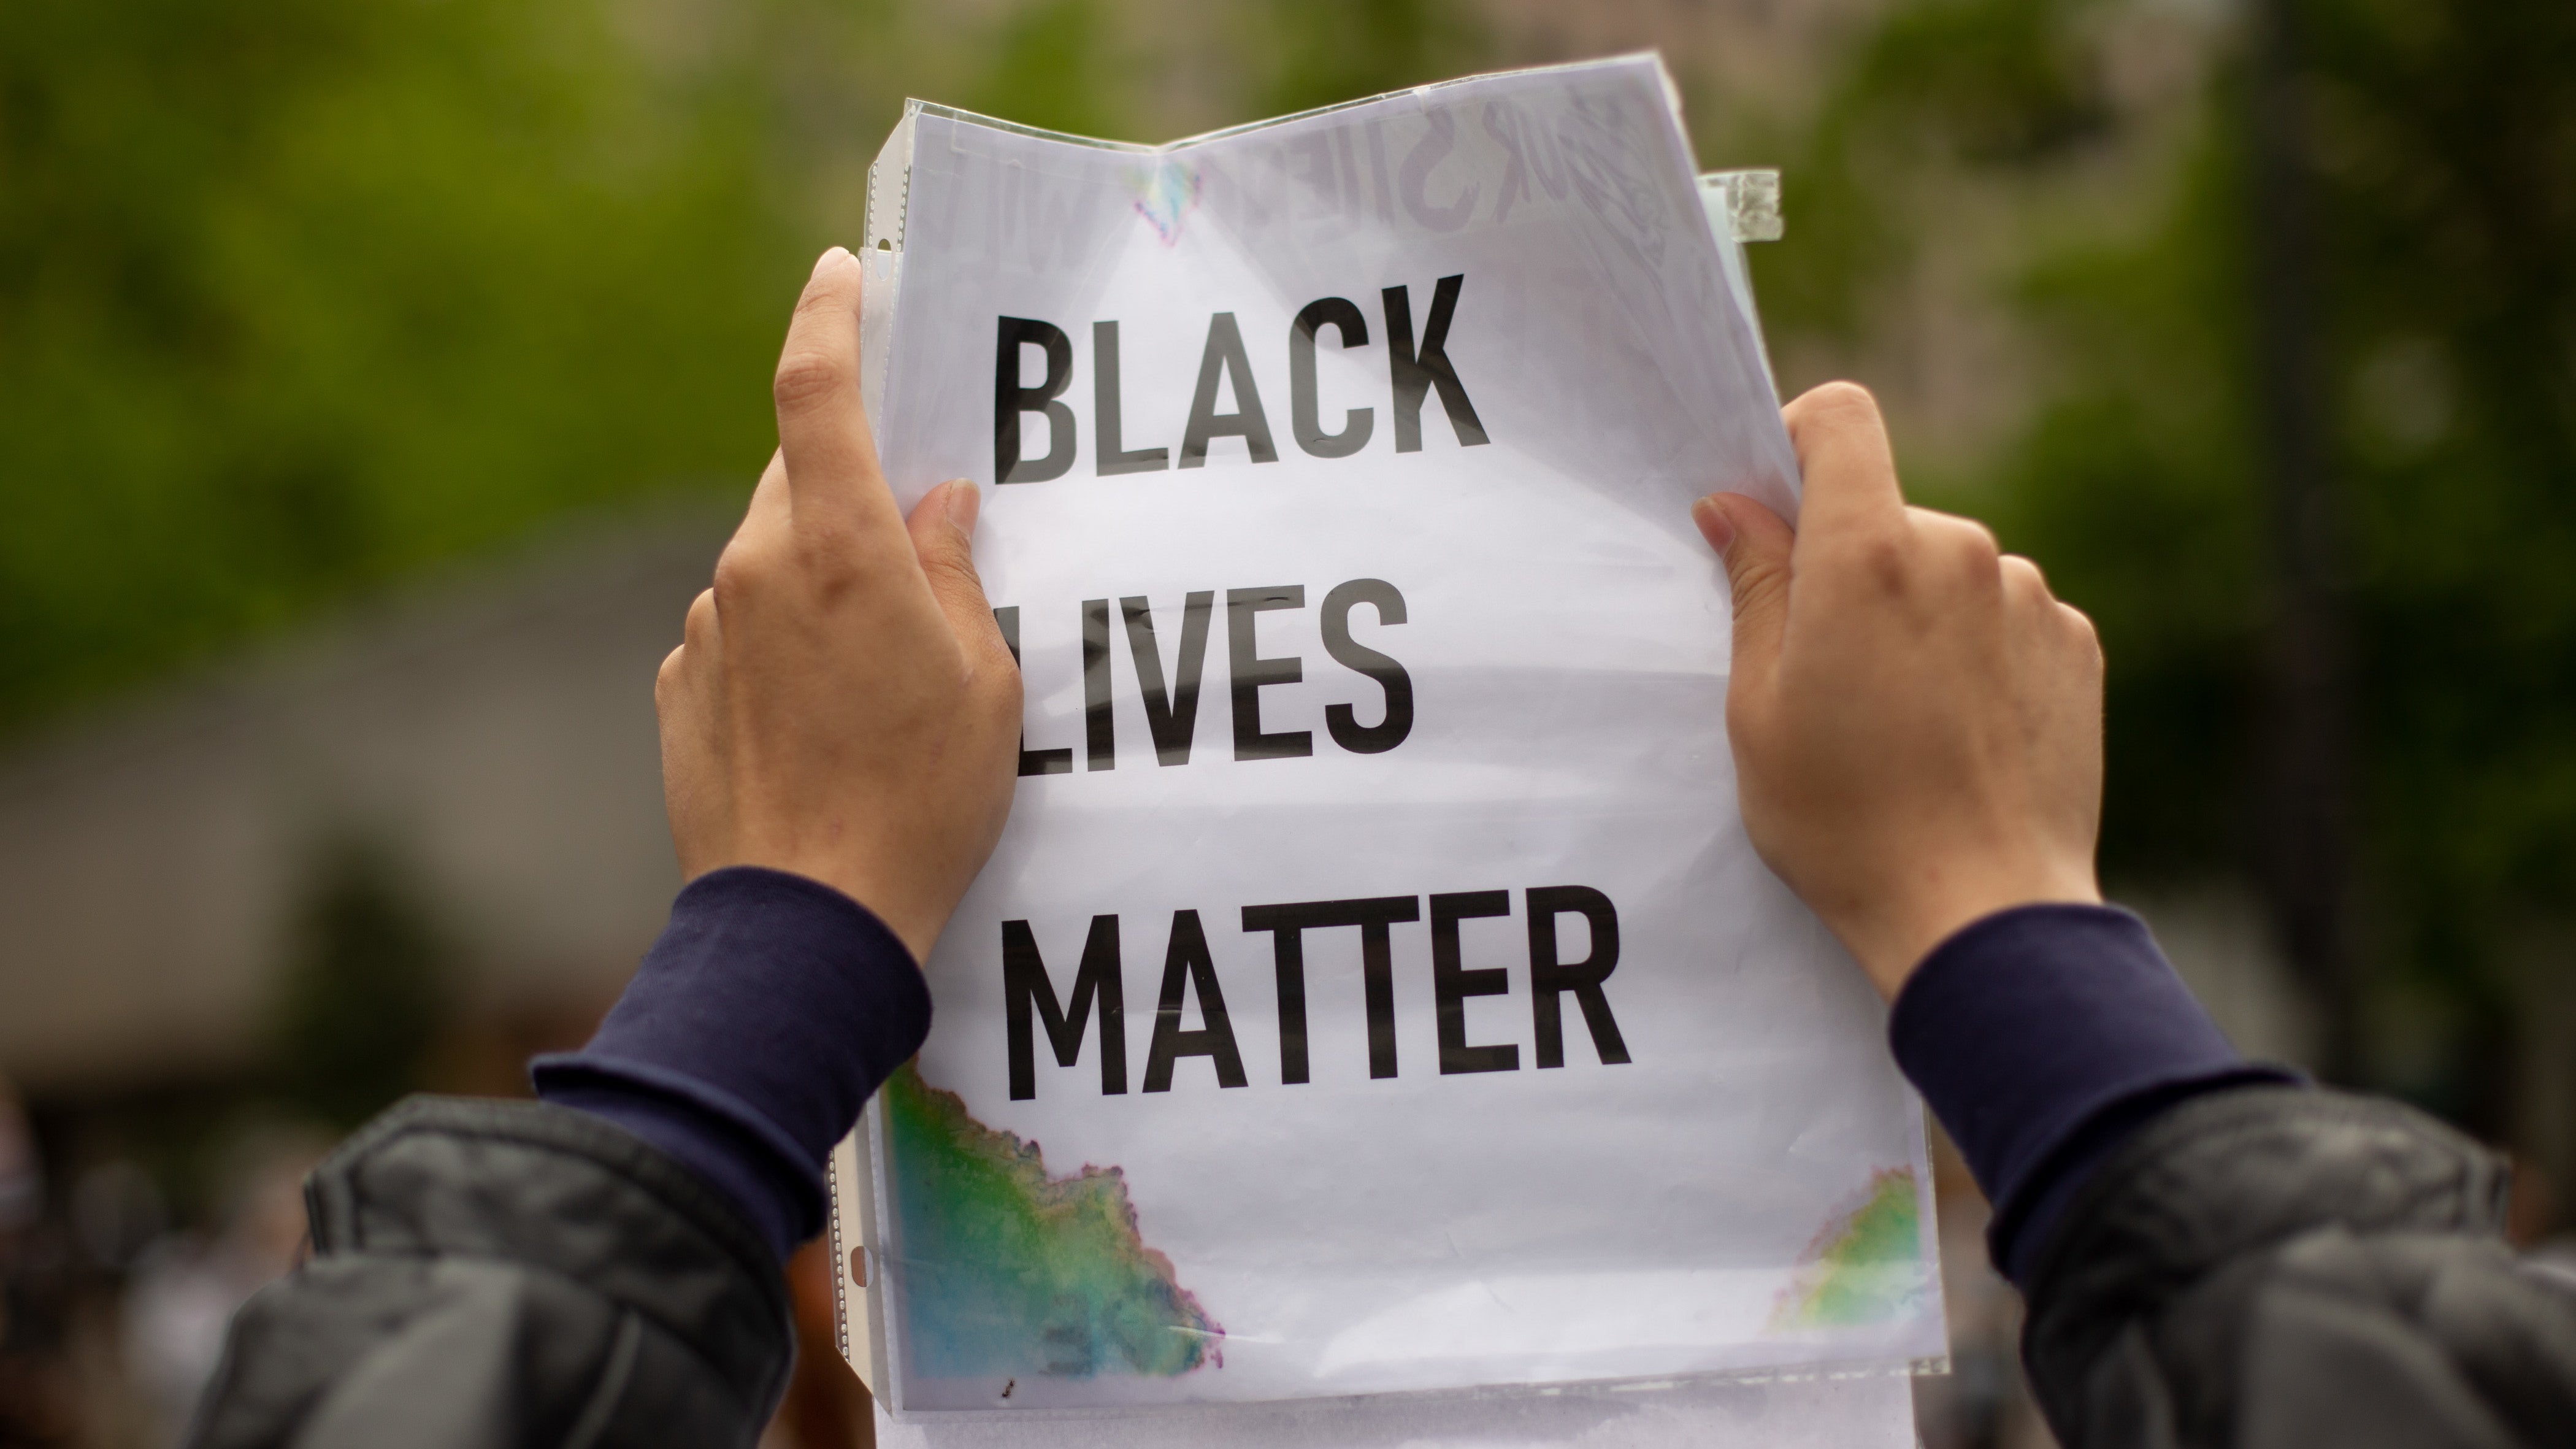 Game Companies Say They’re Supporting Black Lives Matter, But Few Are Offering Specifics